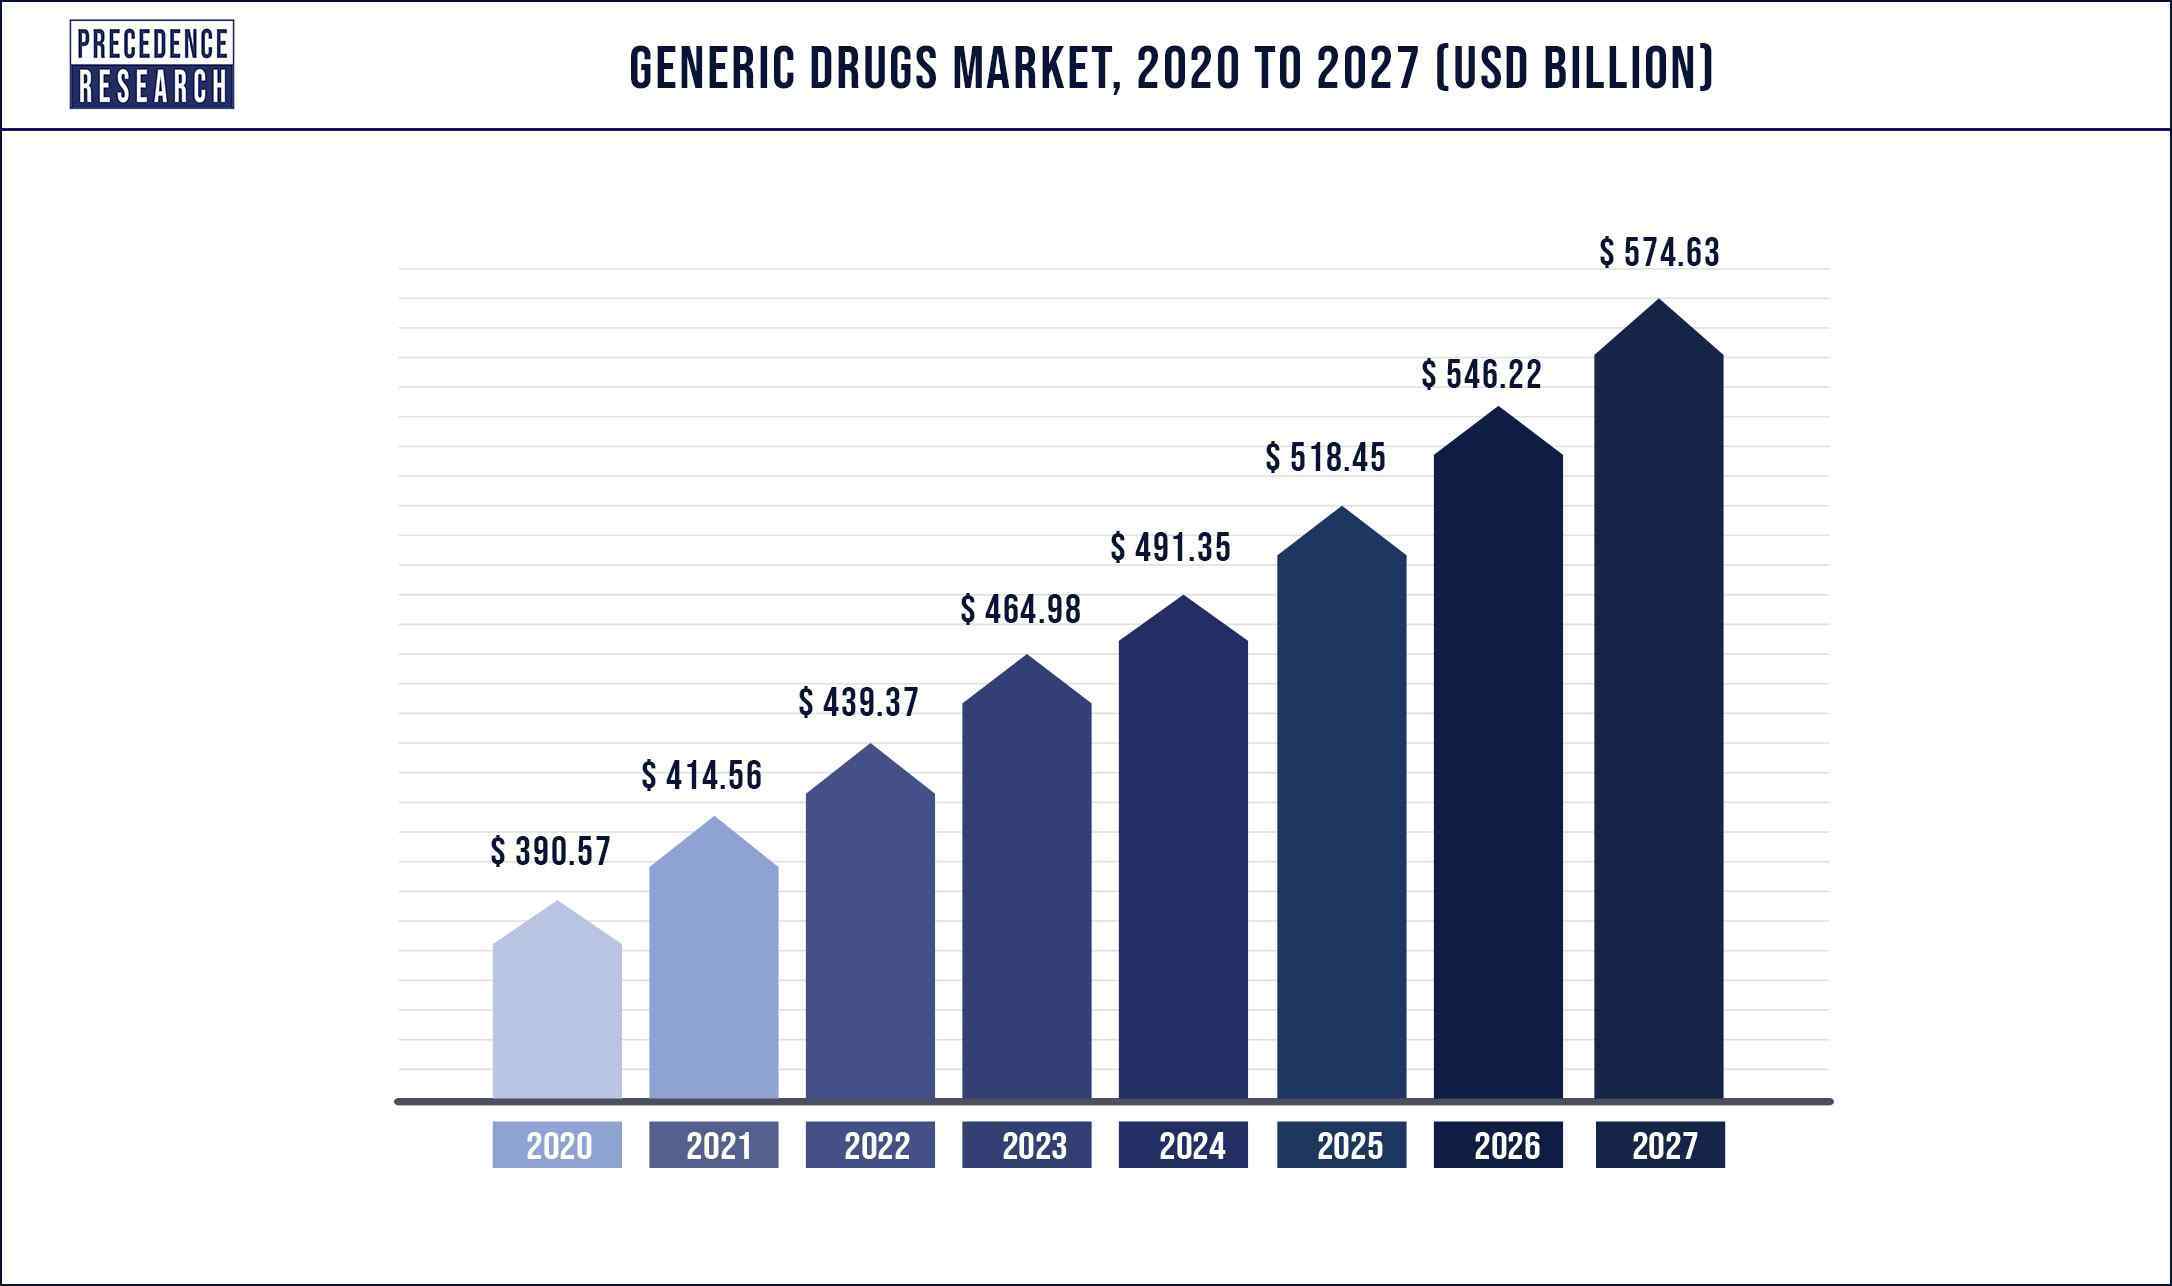 Generic Drugs Market Size 2020 to 2027